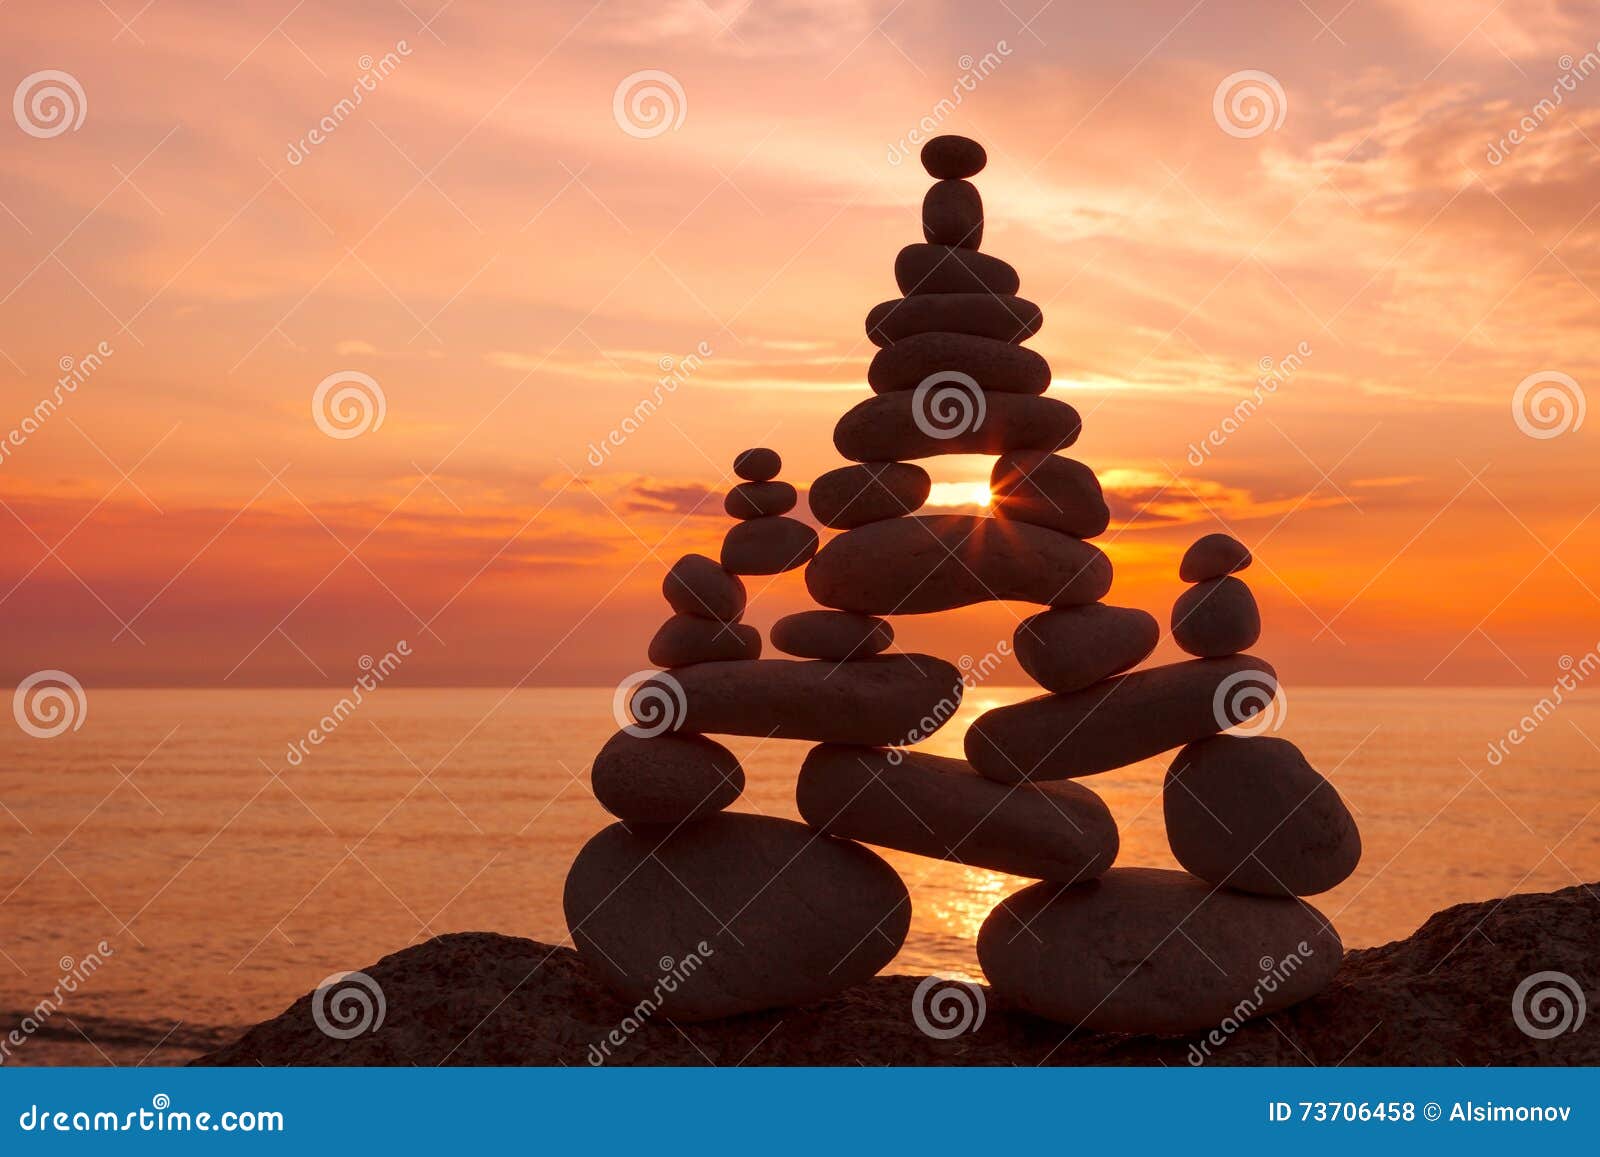 concept of harmony and balance. rock zen at sunset.